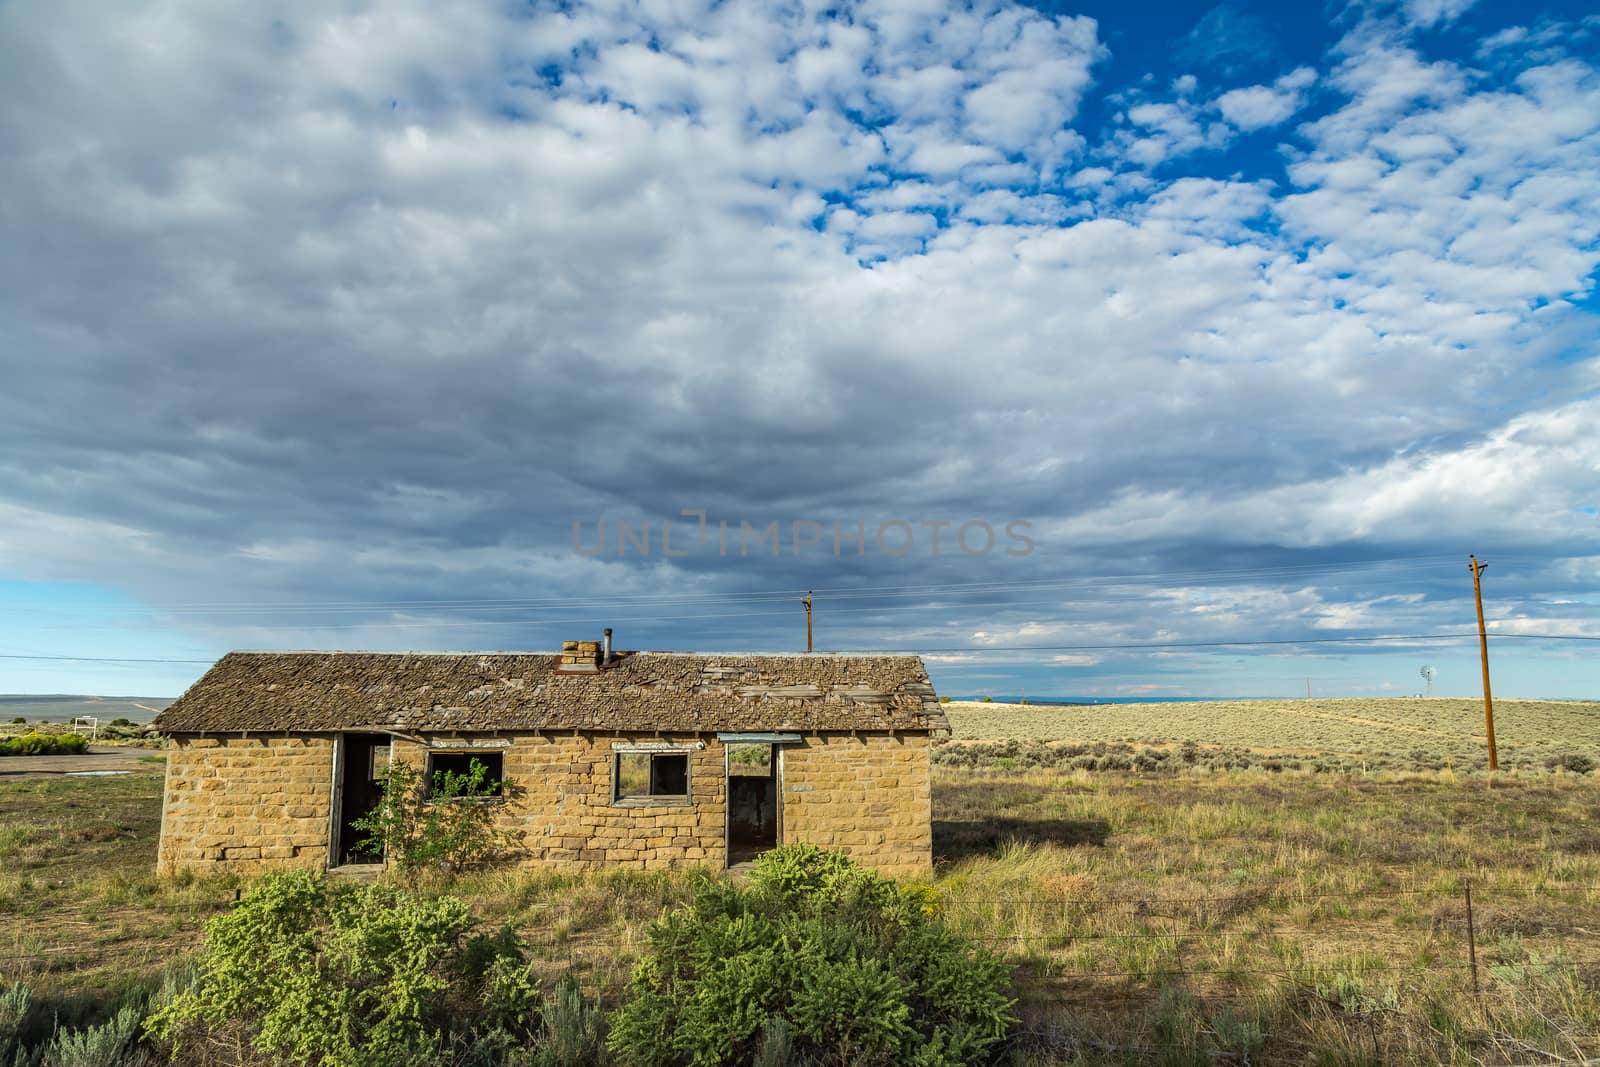 Abandoned in the high desert by adifferentbrian